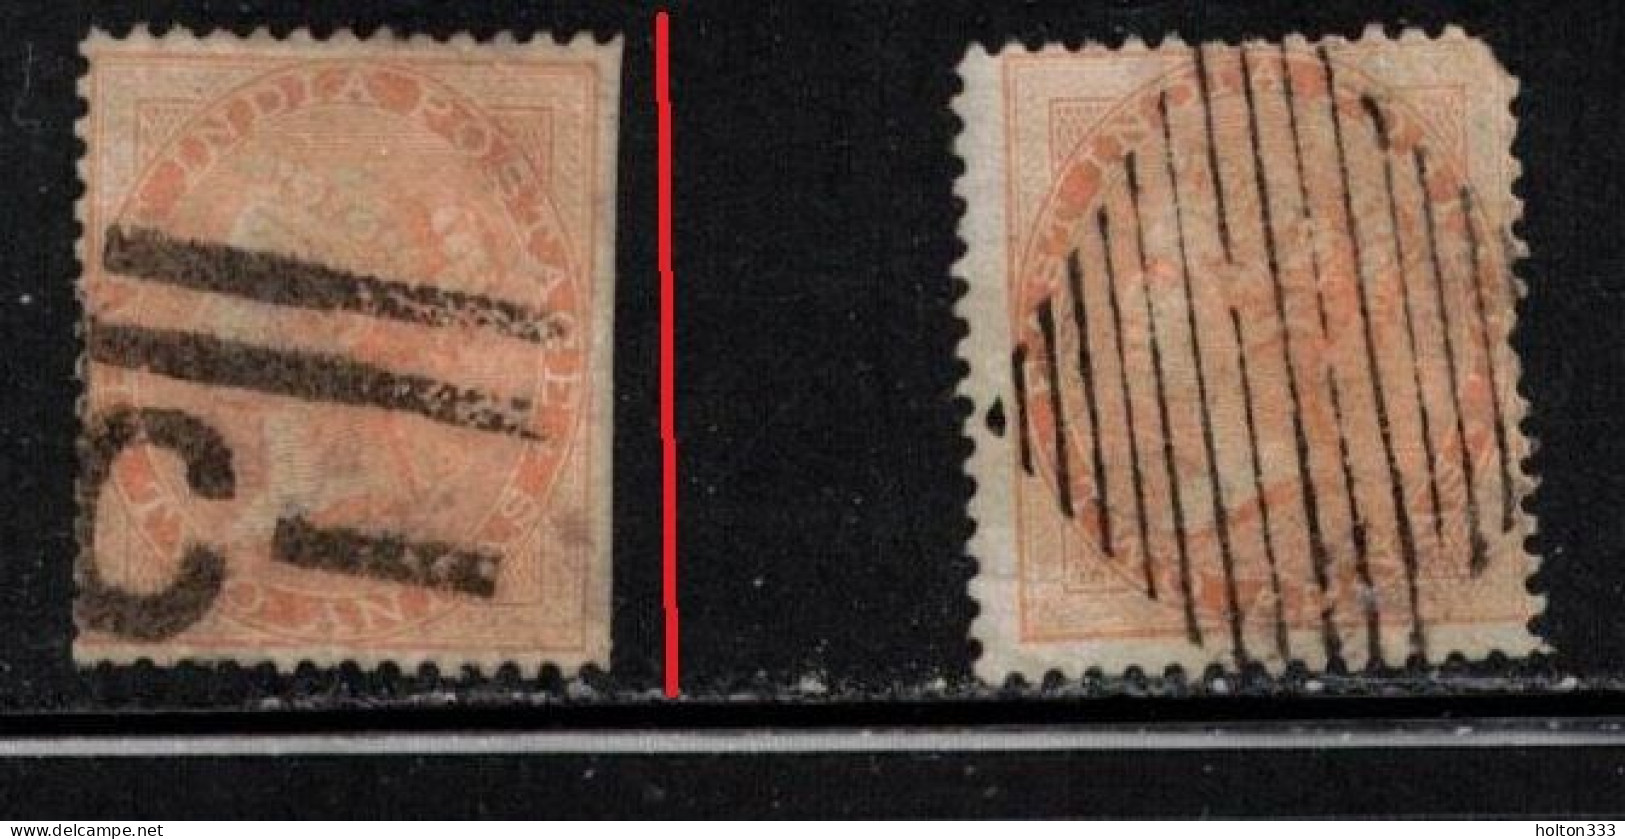 INDIA Scott # 23 Used X 2 - QV - Hinge Remnant - Clipped Perfs On 1 Stamp - 1854 Compagnia Inglese Delle Indie